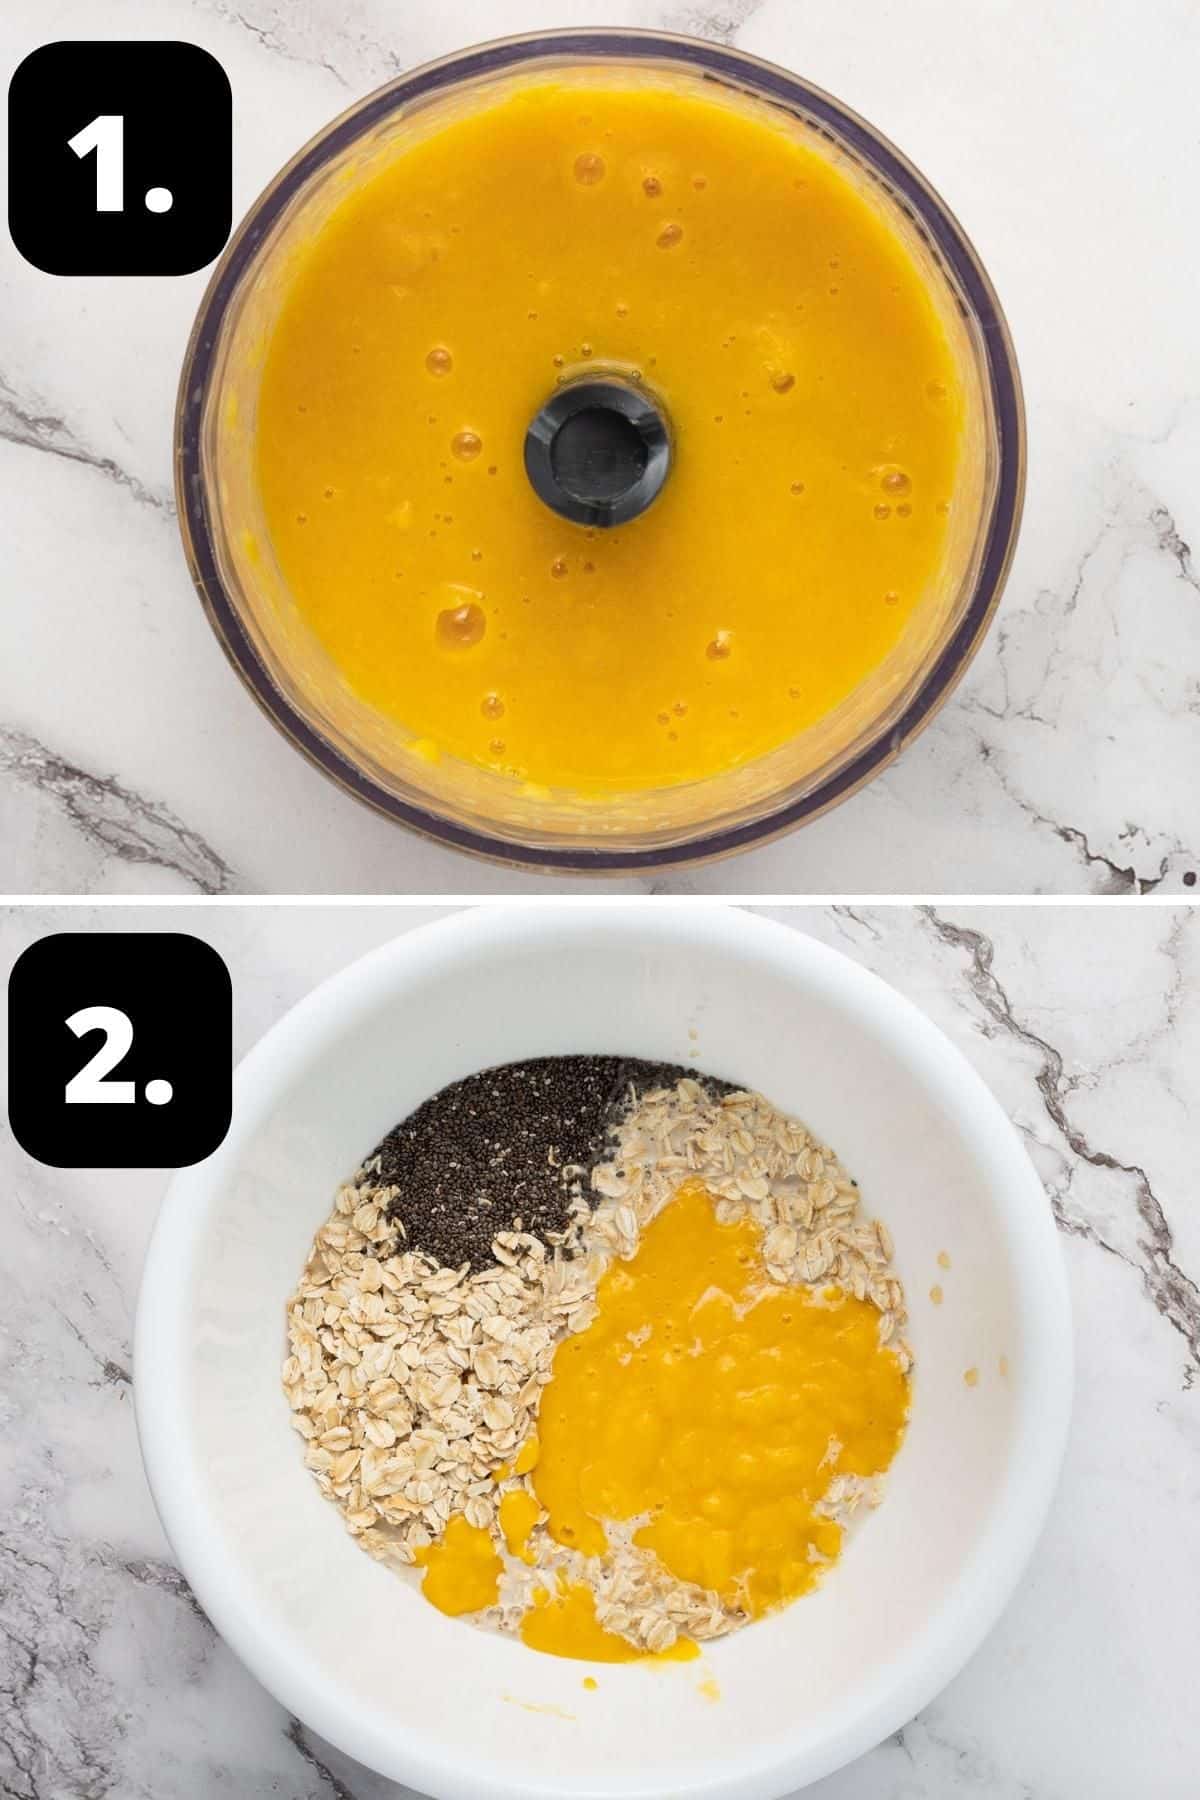 Steps 1-2 of preparing this recipe - the pureed mango and combining all of the ingredients for the oats in a white bowl.